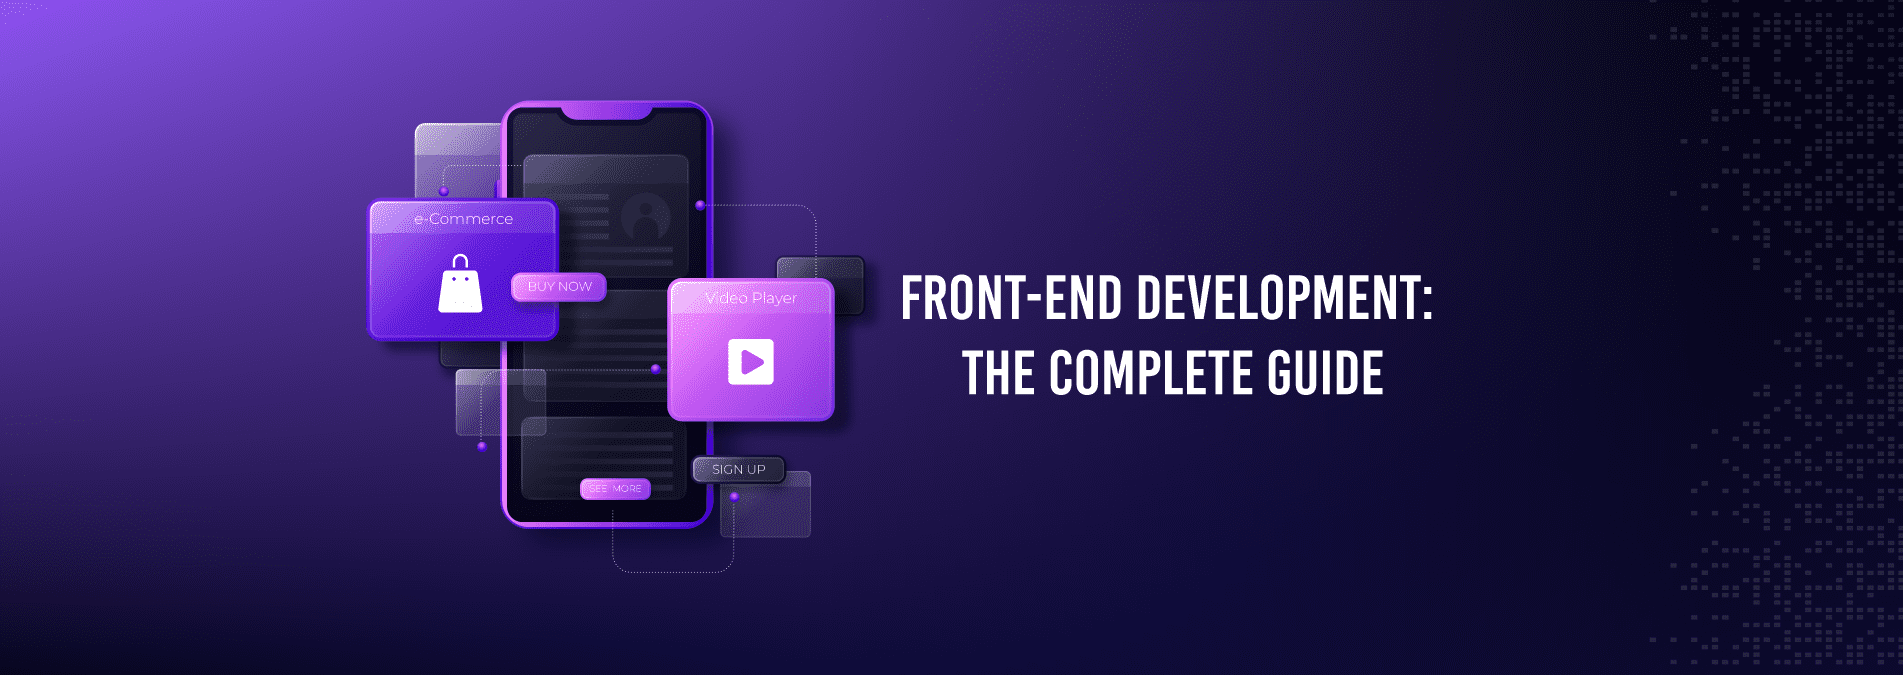 Front-End Development: The Complete Guide - Internet Soft